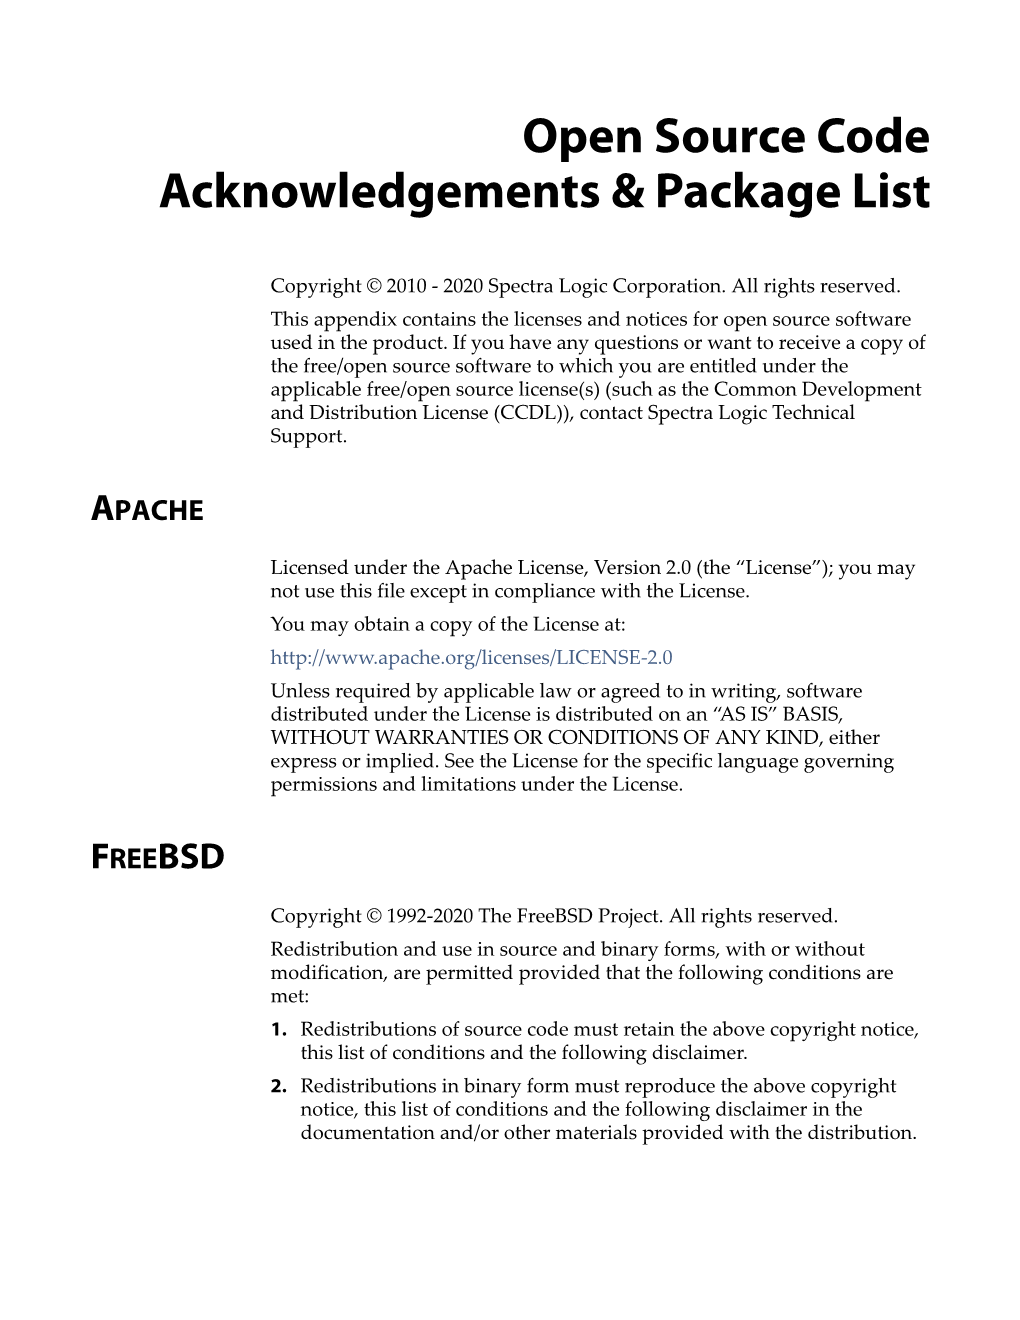 Open Source Code Acknowledgements & Package List